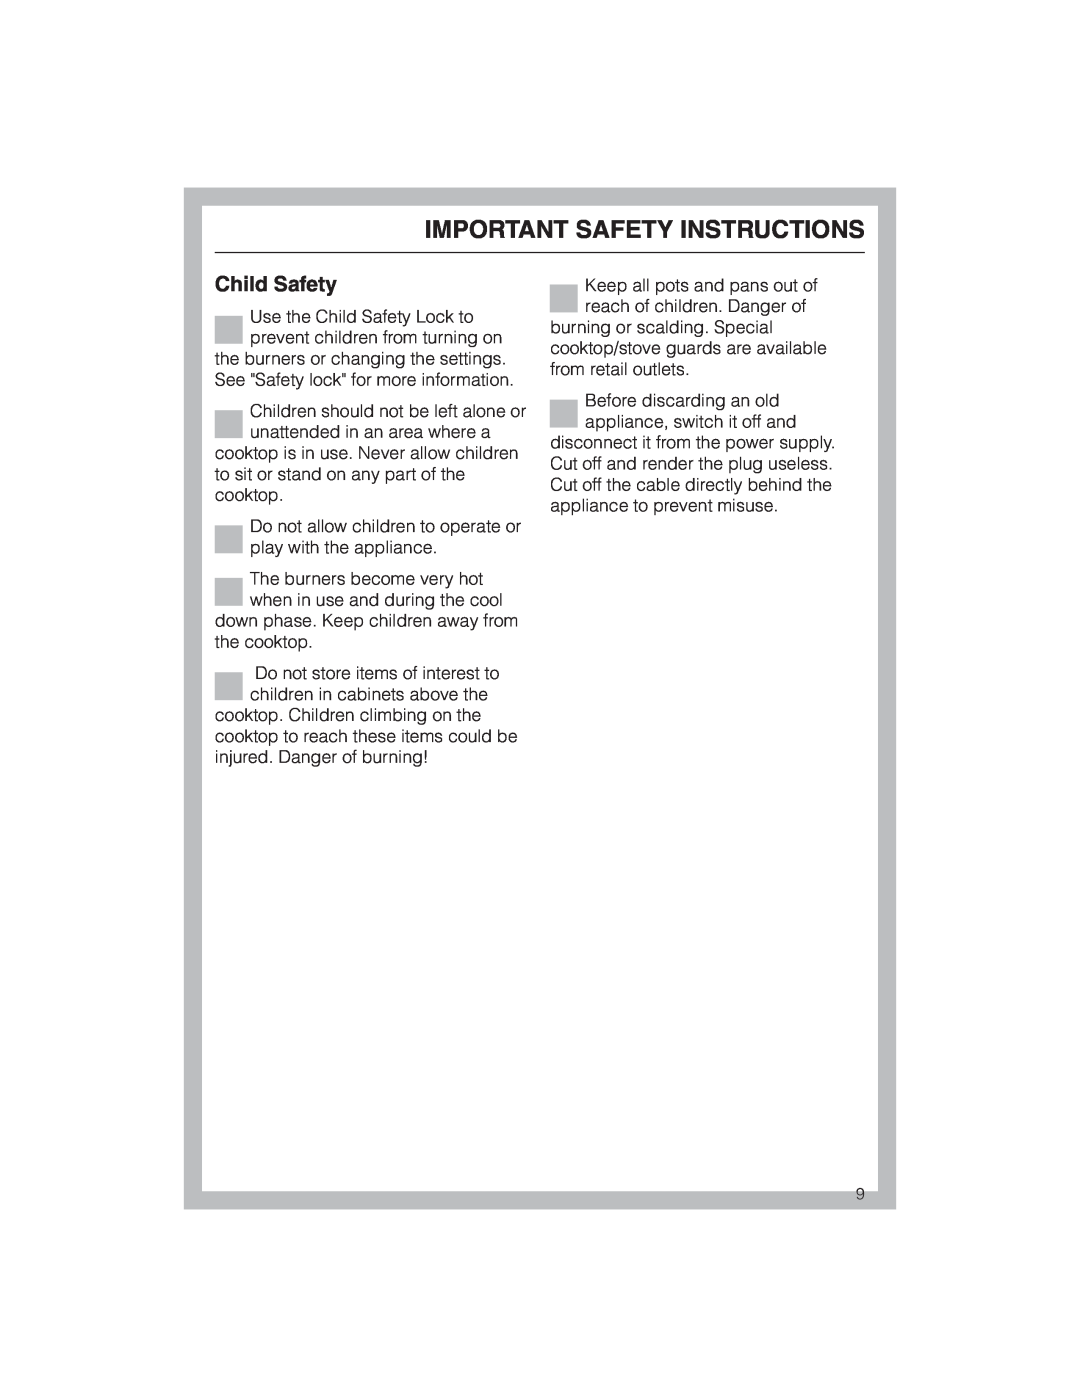 Miele KM 5773 installation instructions Child Safety, Important Safety Instructions 